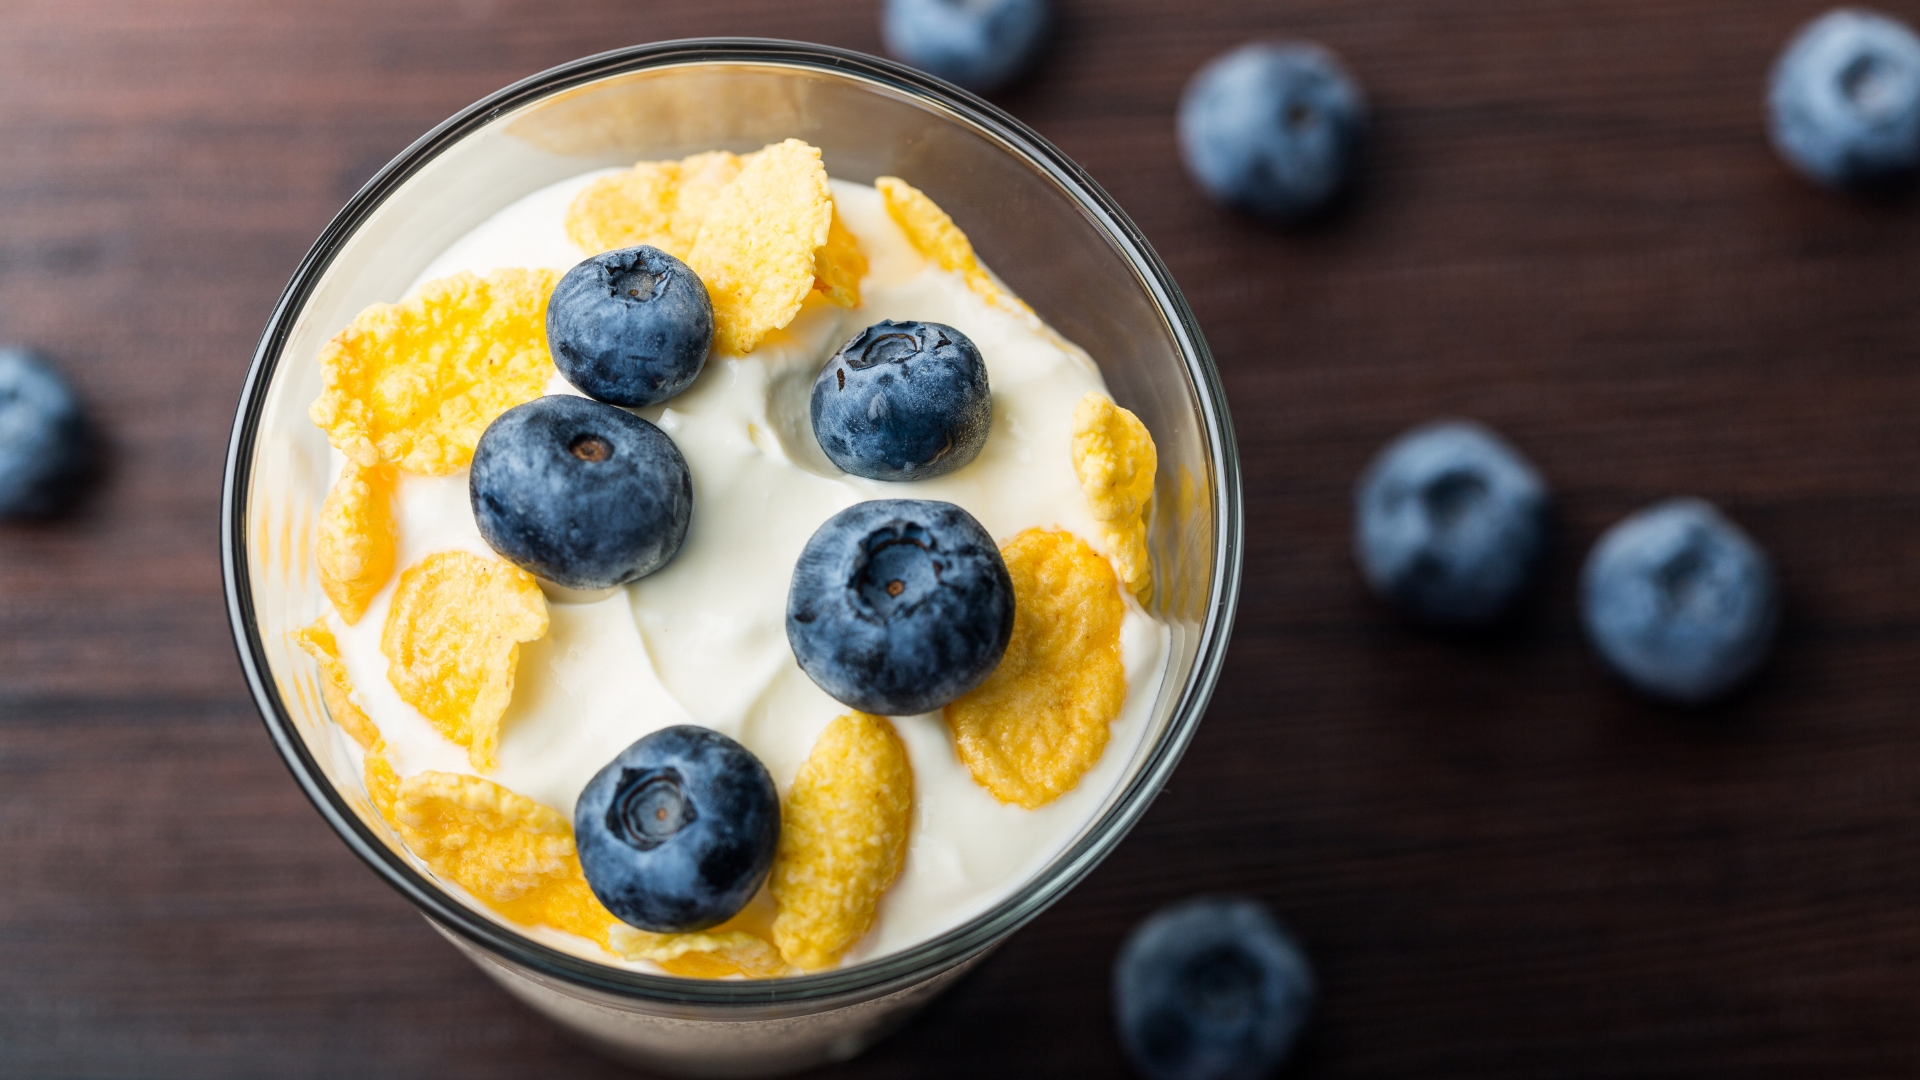 A healthy snack with yoghurt, blueberries and flakes in a cup